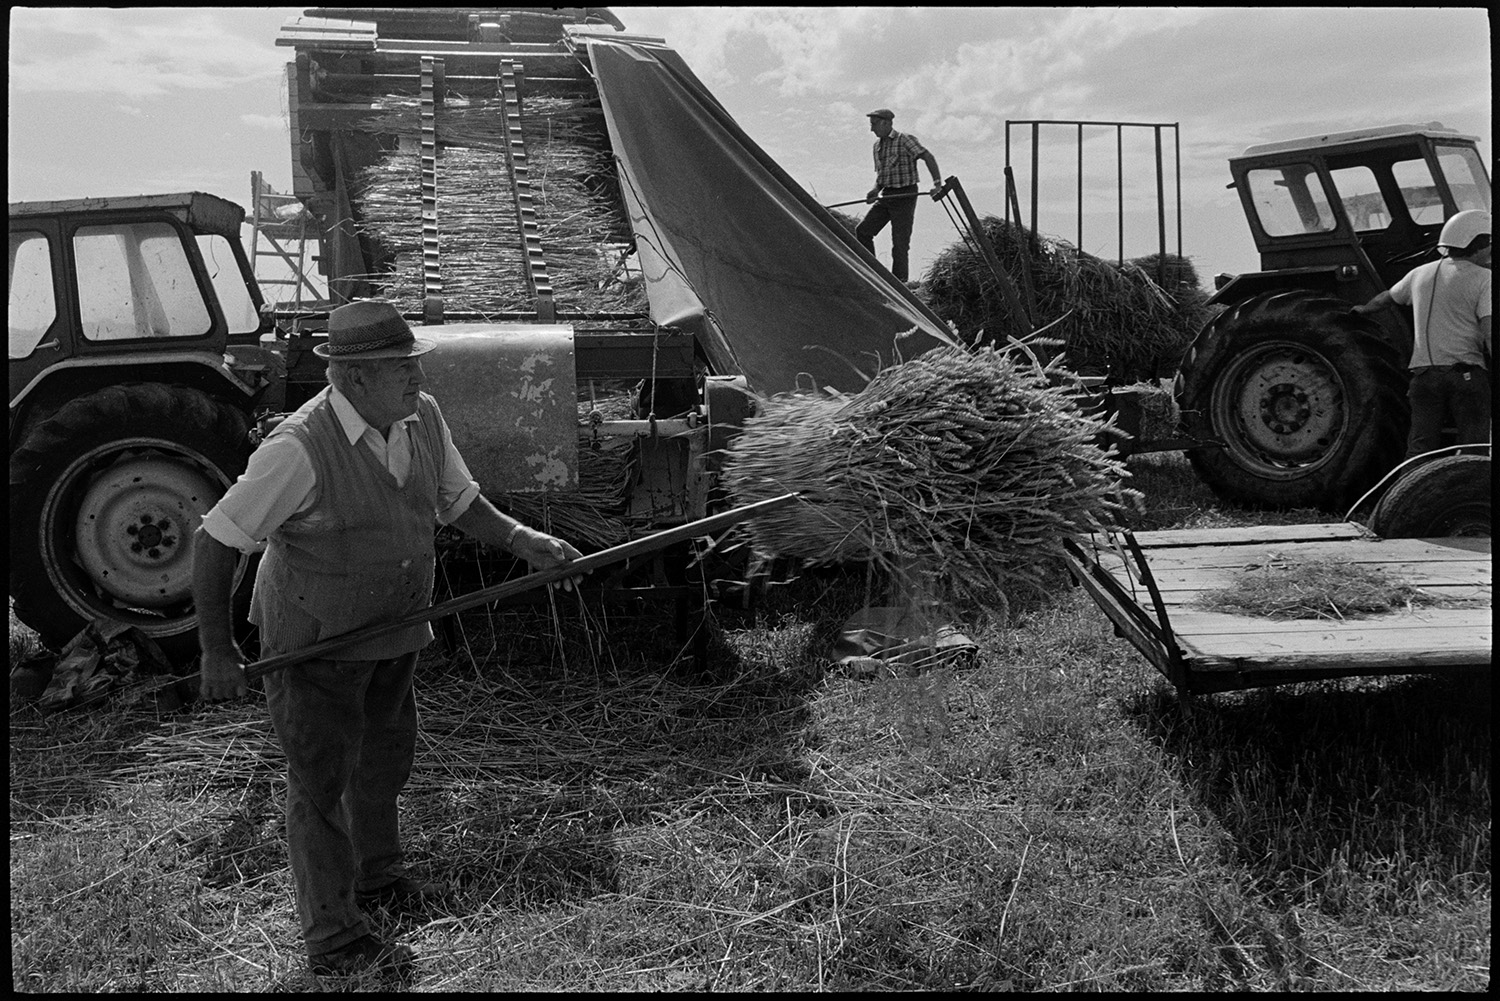 Reedcombing in harvest field men carrying nitches of wheat to reed comber.
[Men, possibly from the Down family, working with a reed comber in a field at Spittle, Chulmleigh. One man is lifting a bundle from the reed comber on to a trailer in the foreground.]